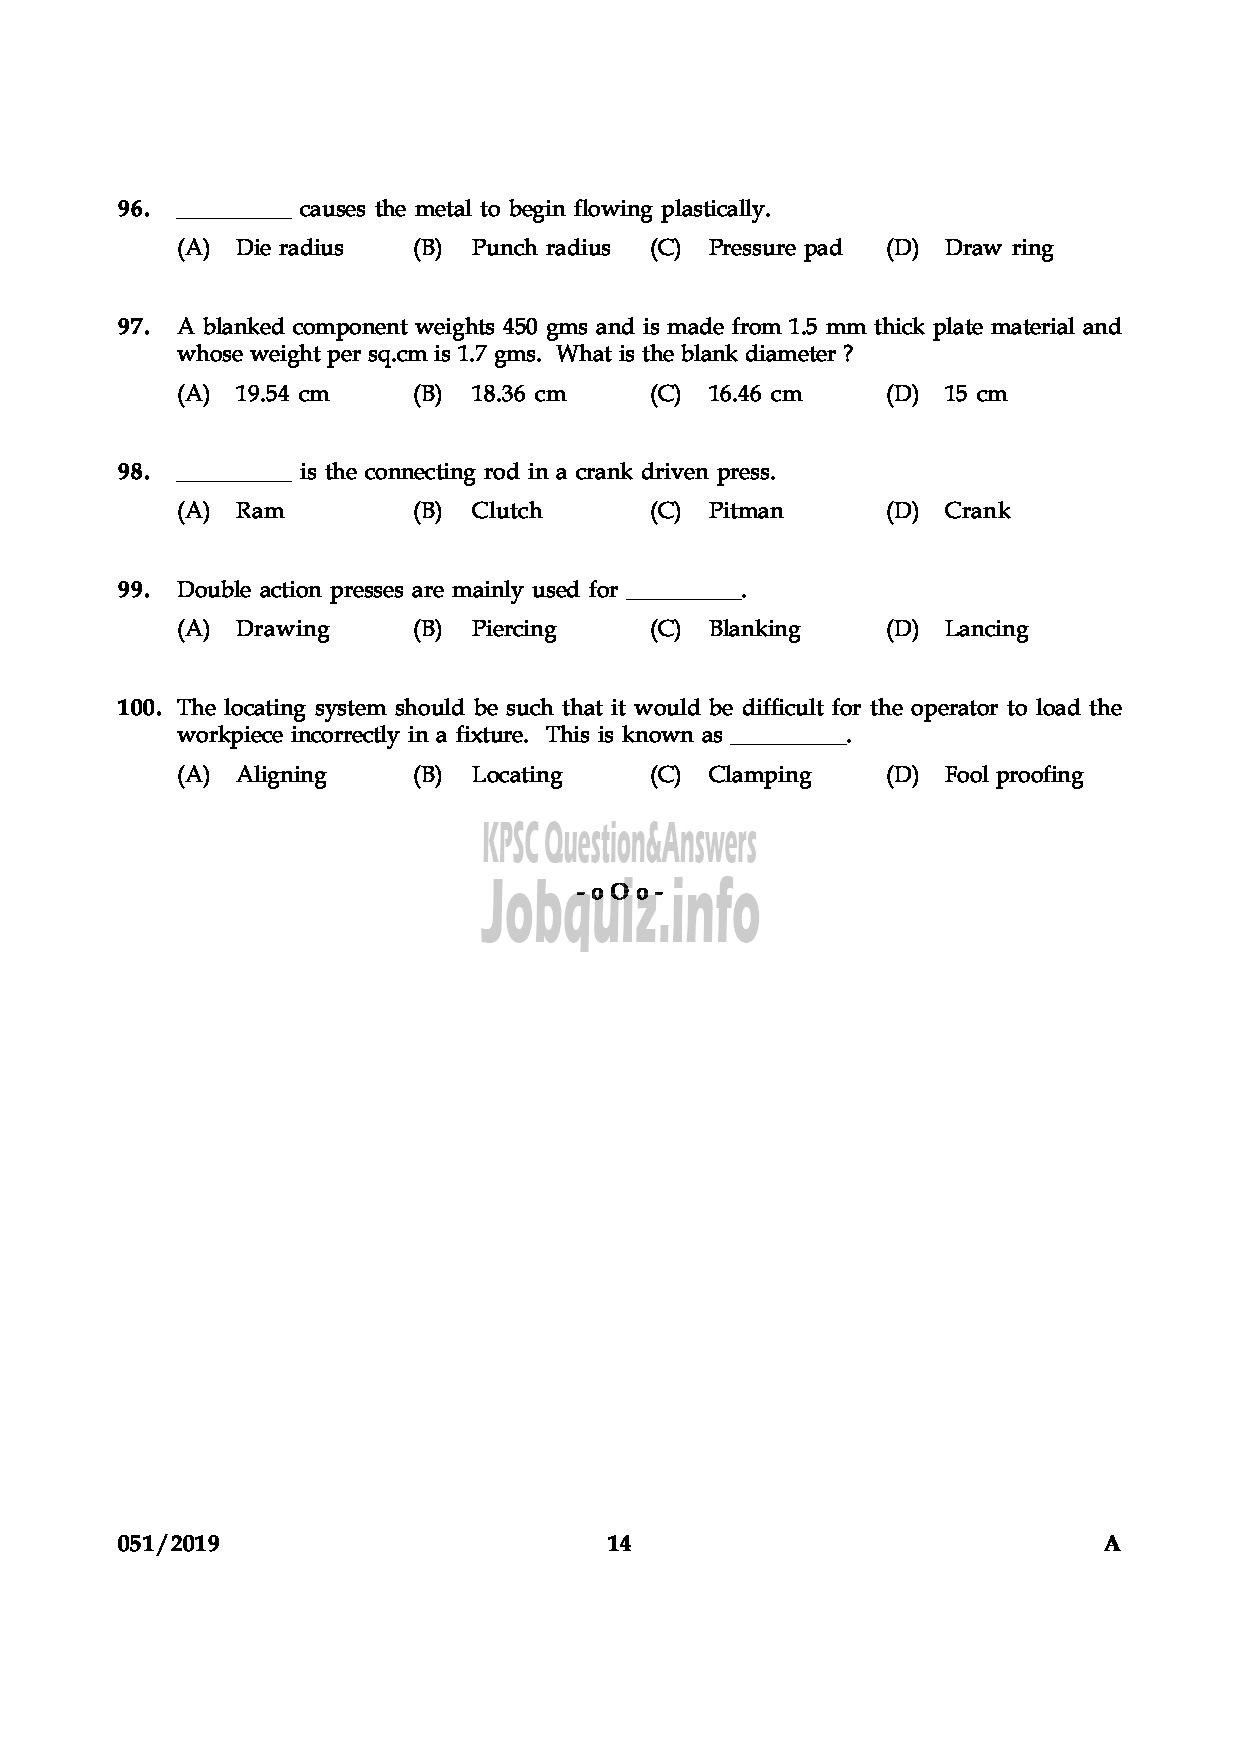 Kerala PSC Question Paper - JUNIOR INSTRUCTOR TOOL & DIE MAKER INDUSTRIAL TRAINING English -14